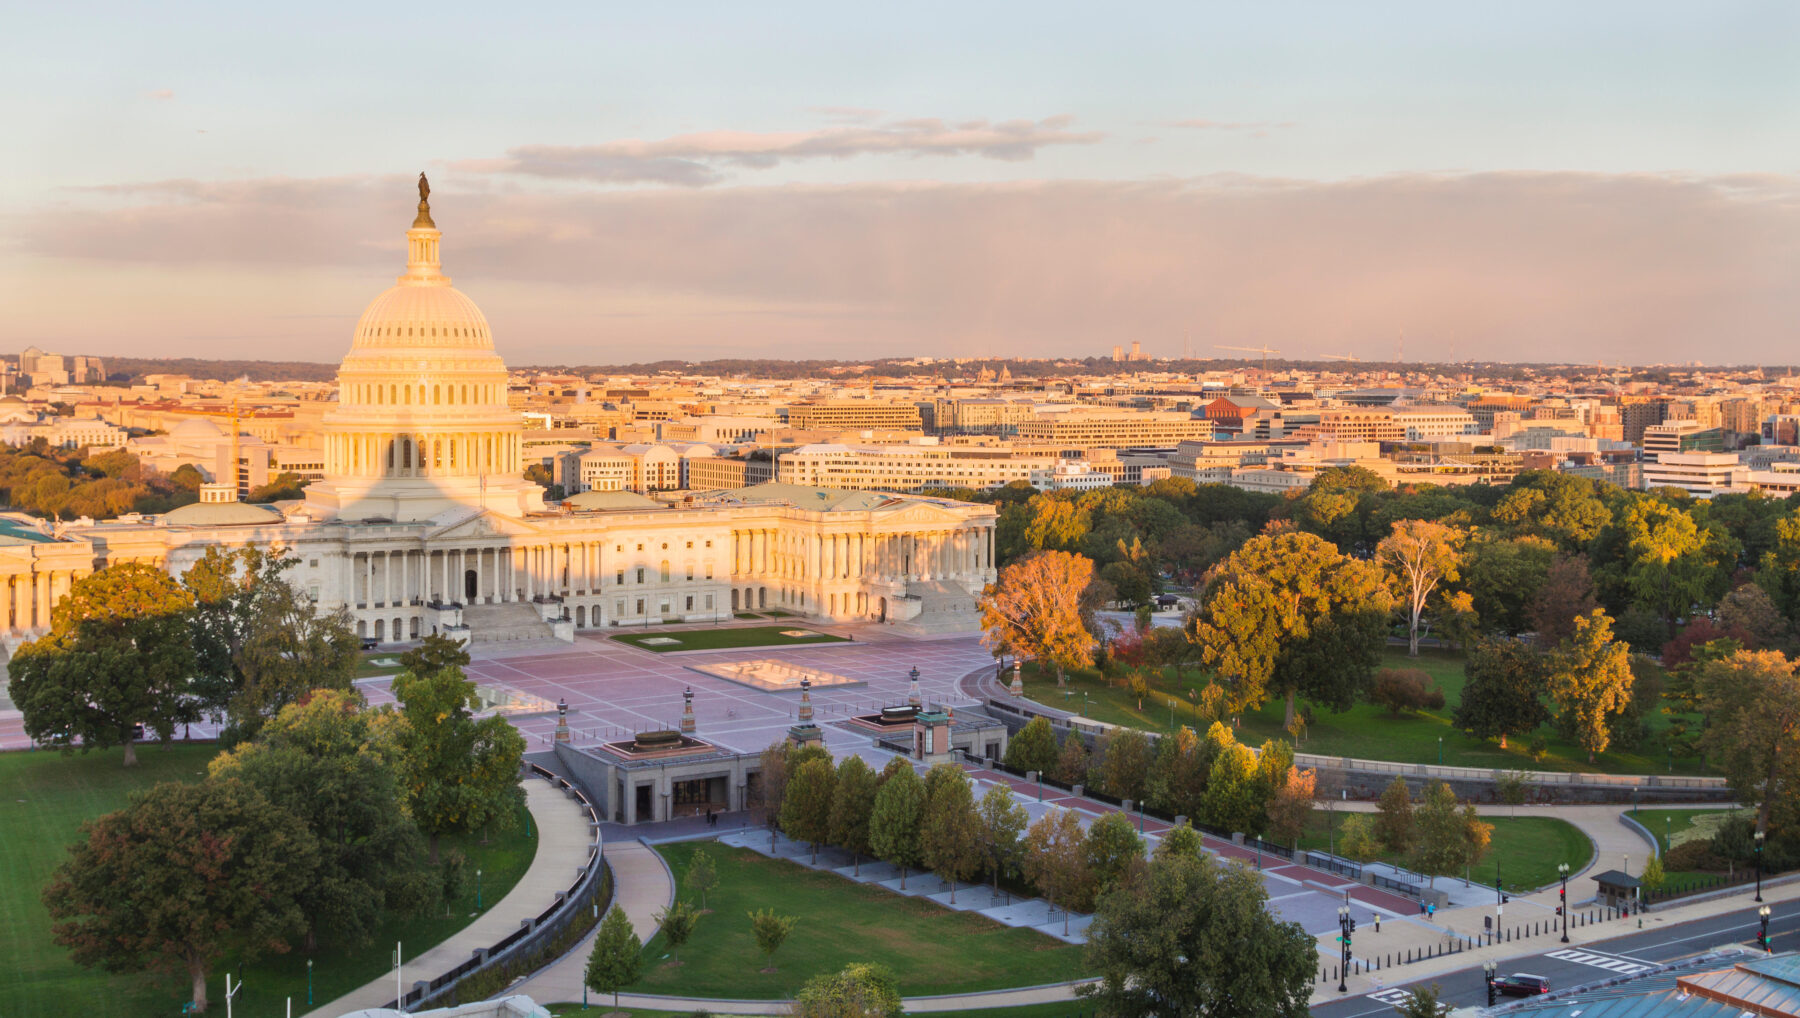 Aerial photo of the sun setting over the U.S. Capitol building and its surrounding landscape